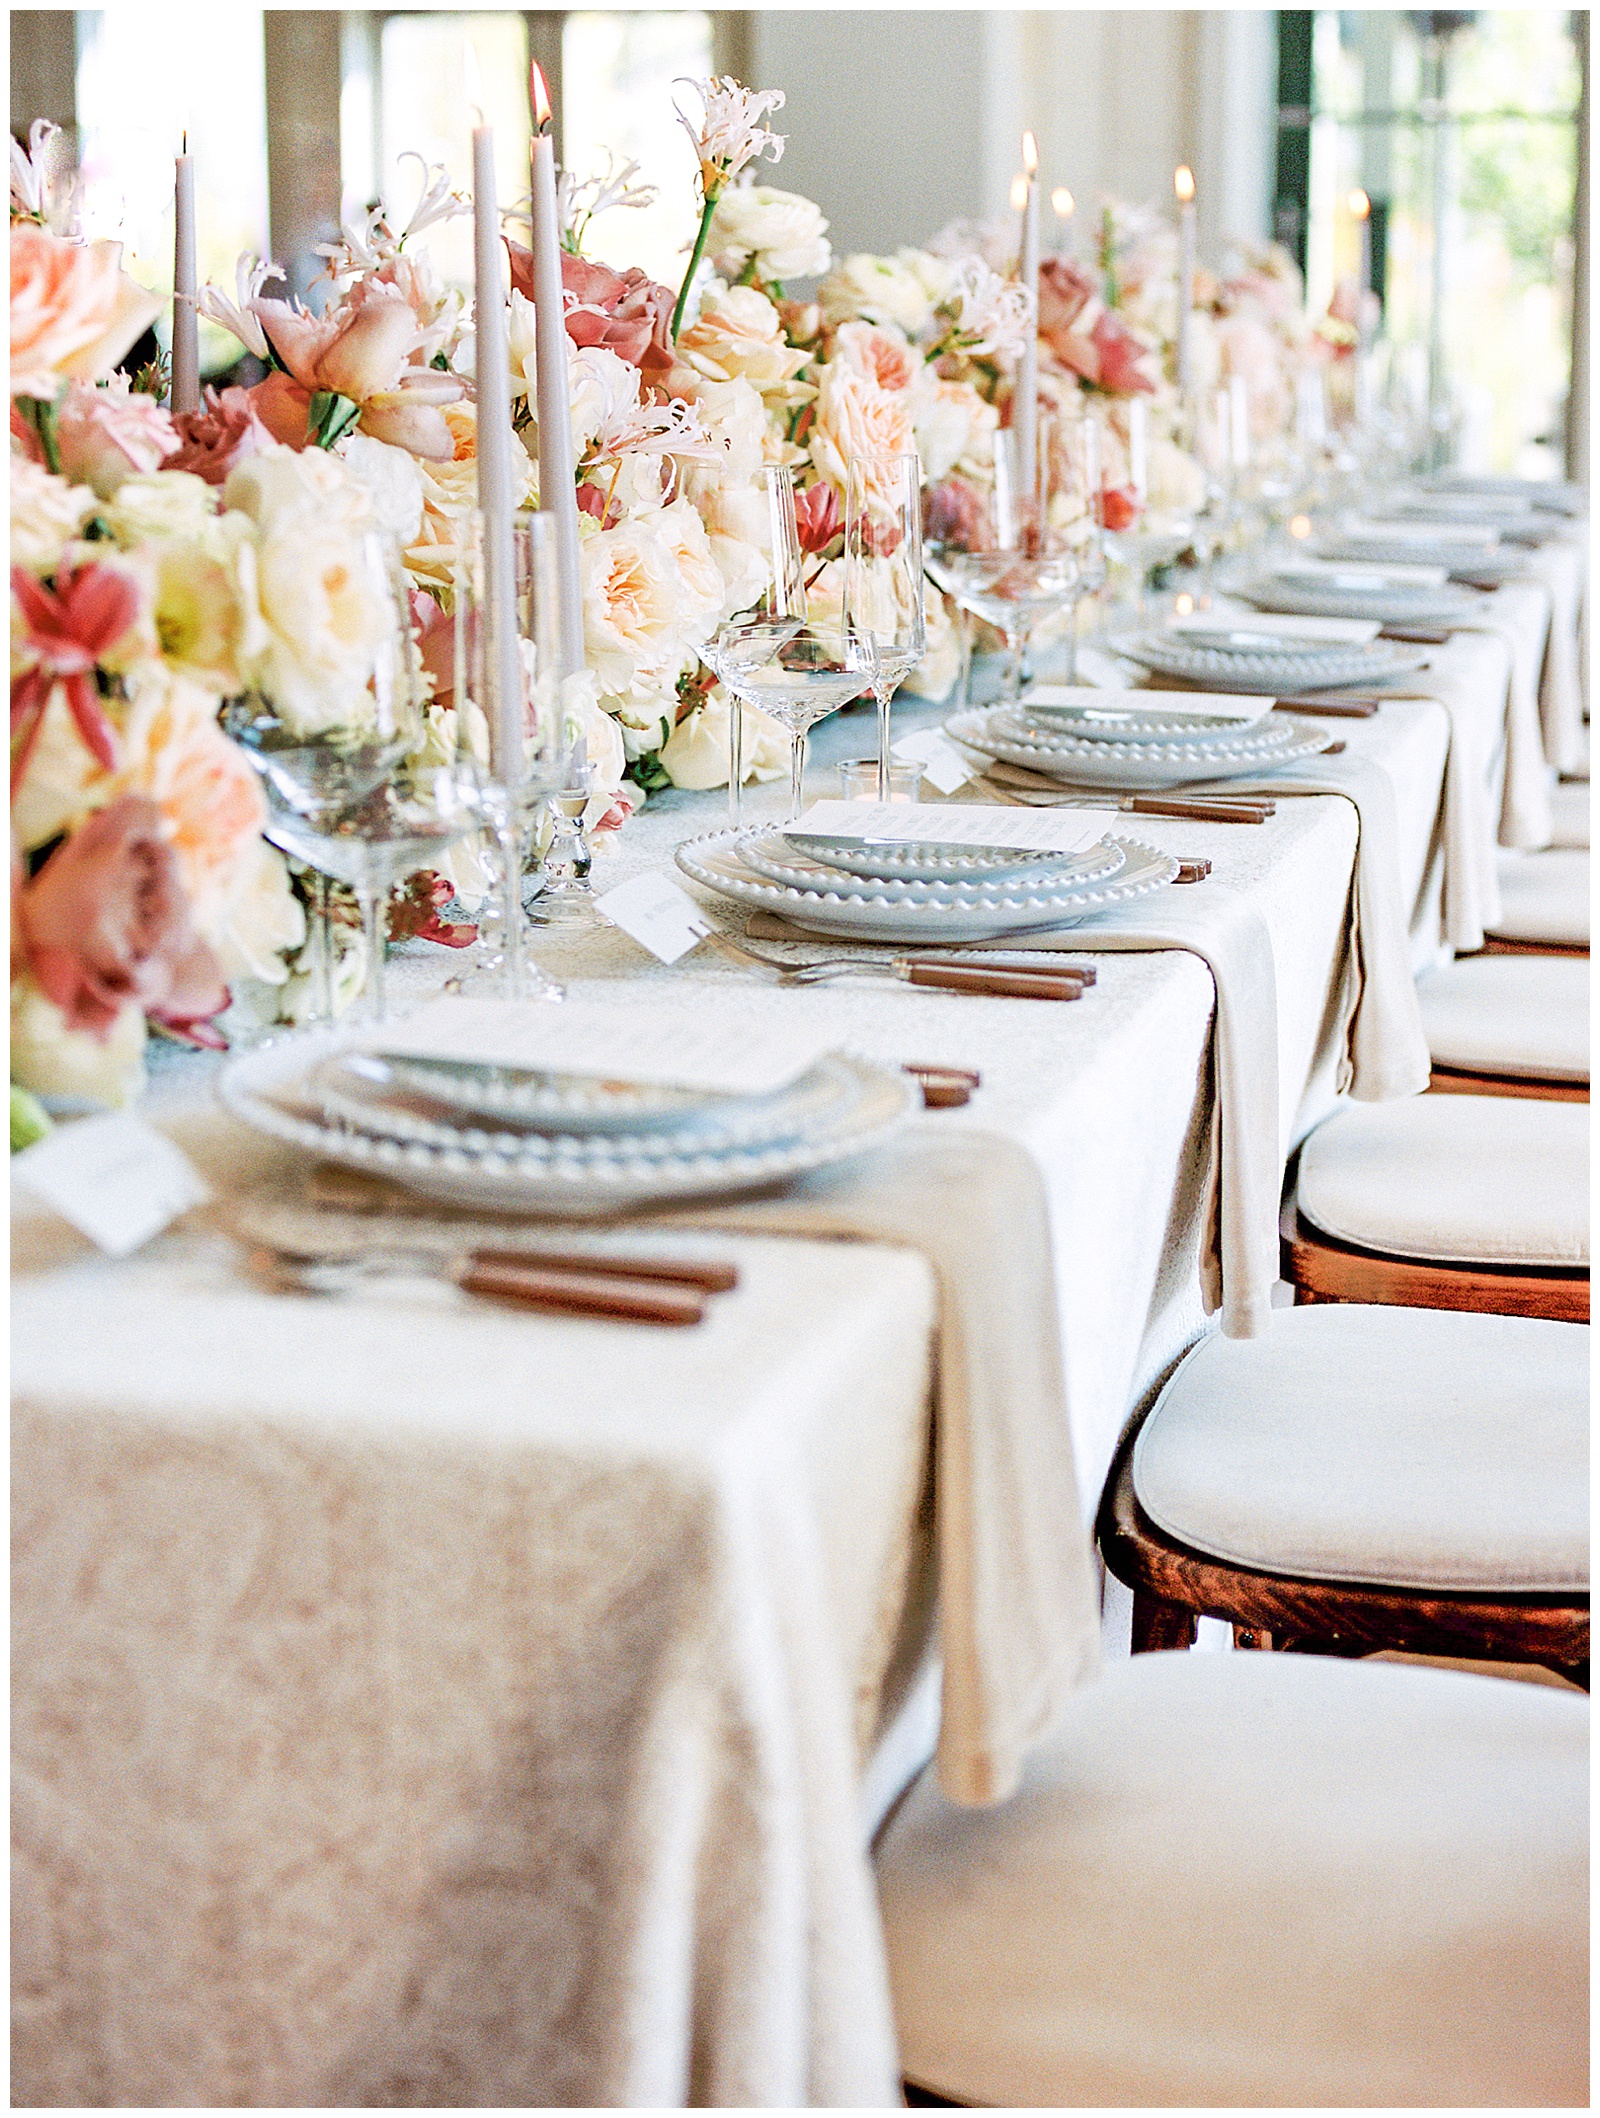 wedding reception with scalloped edge plates and family style table